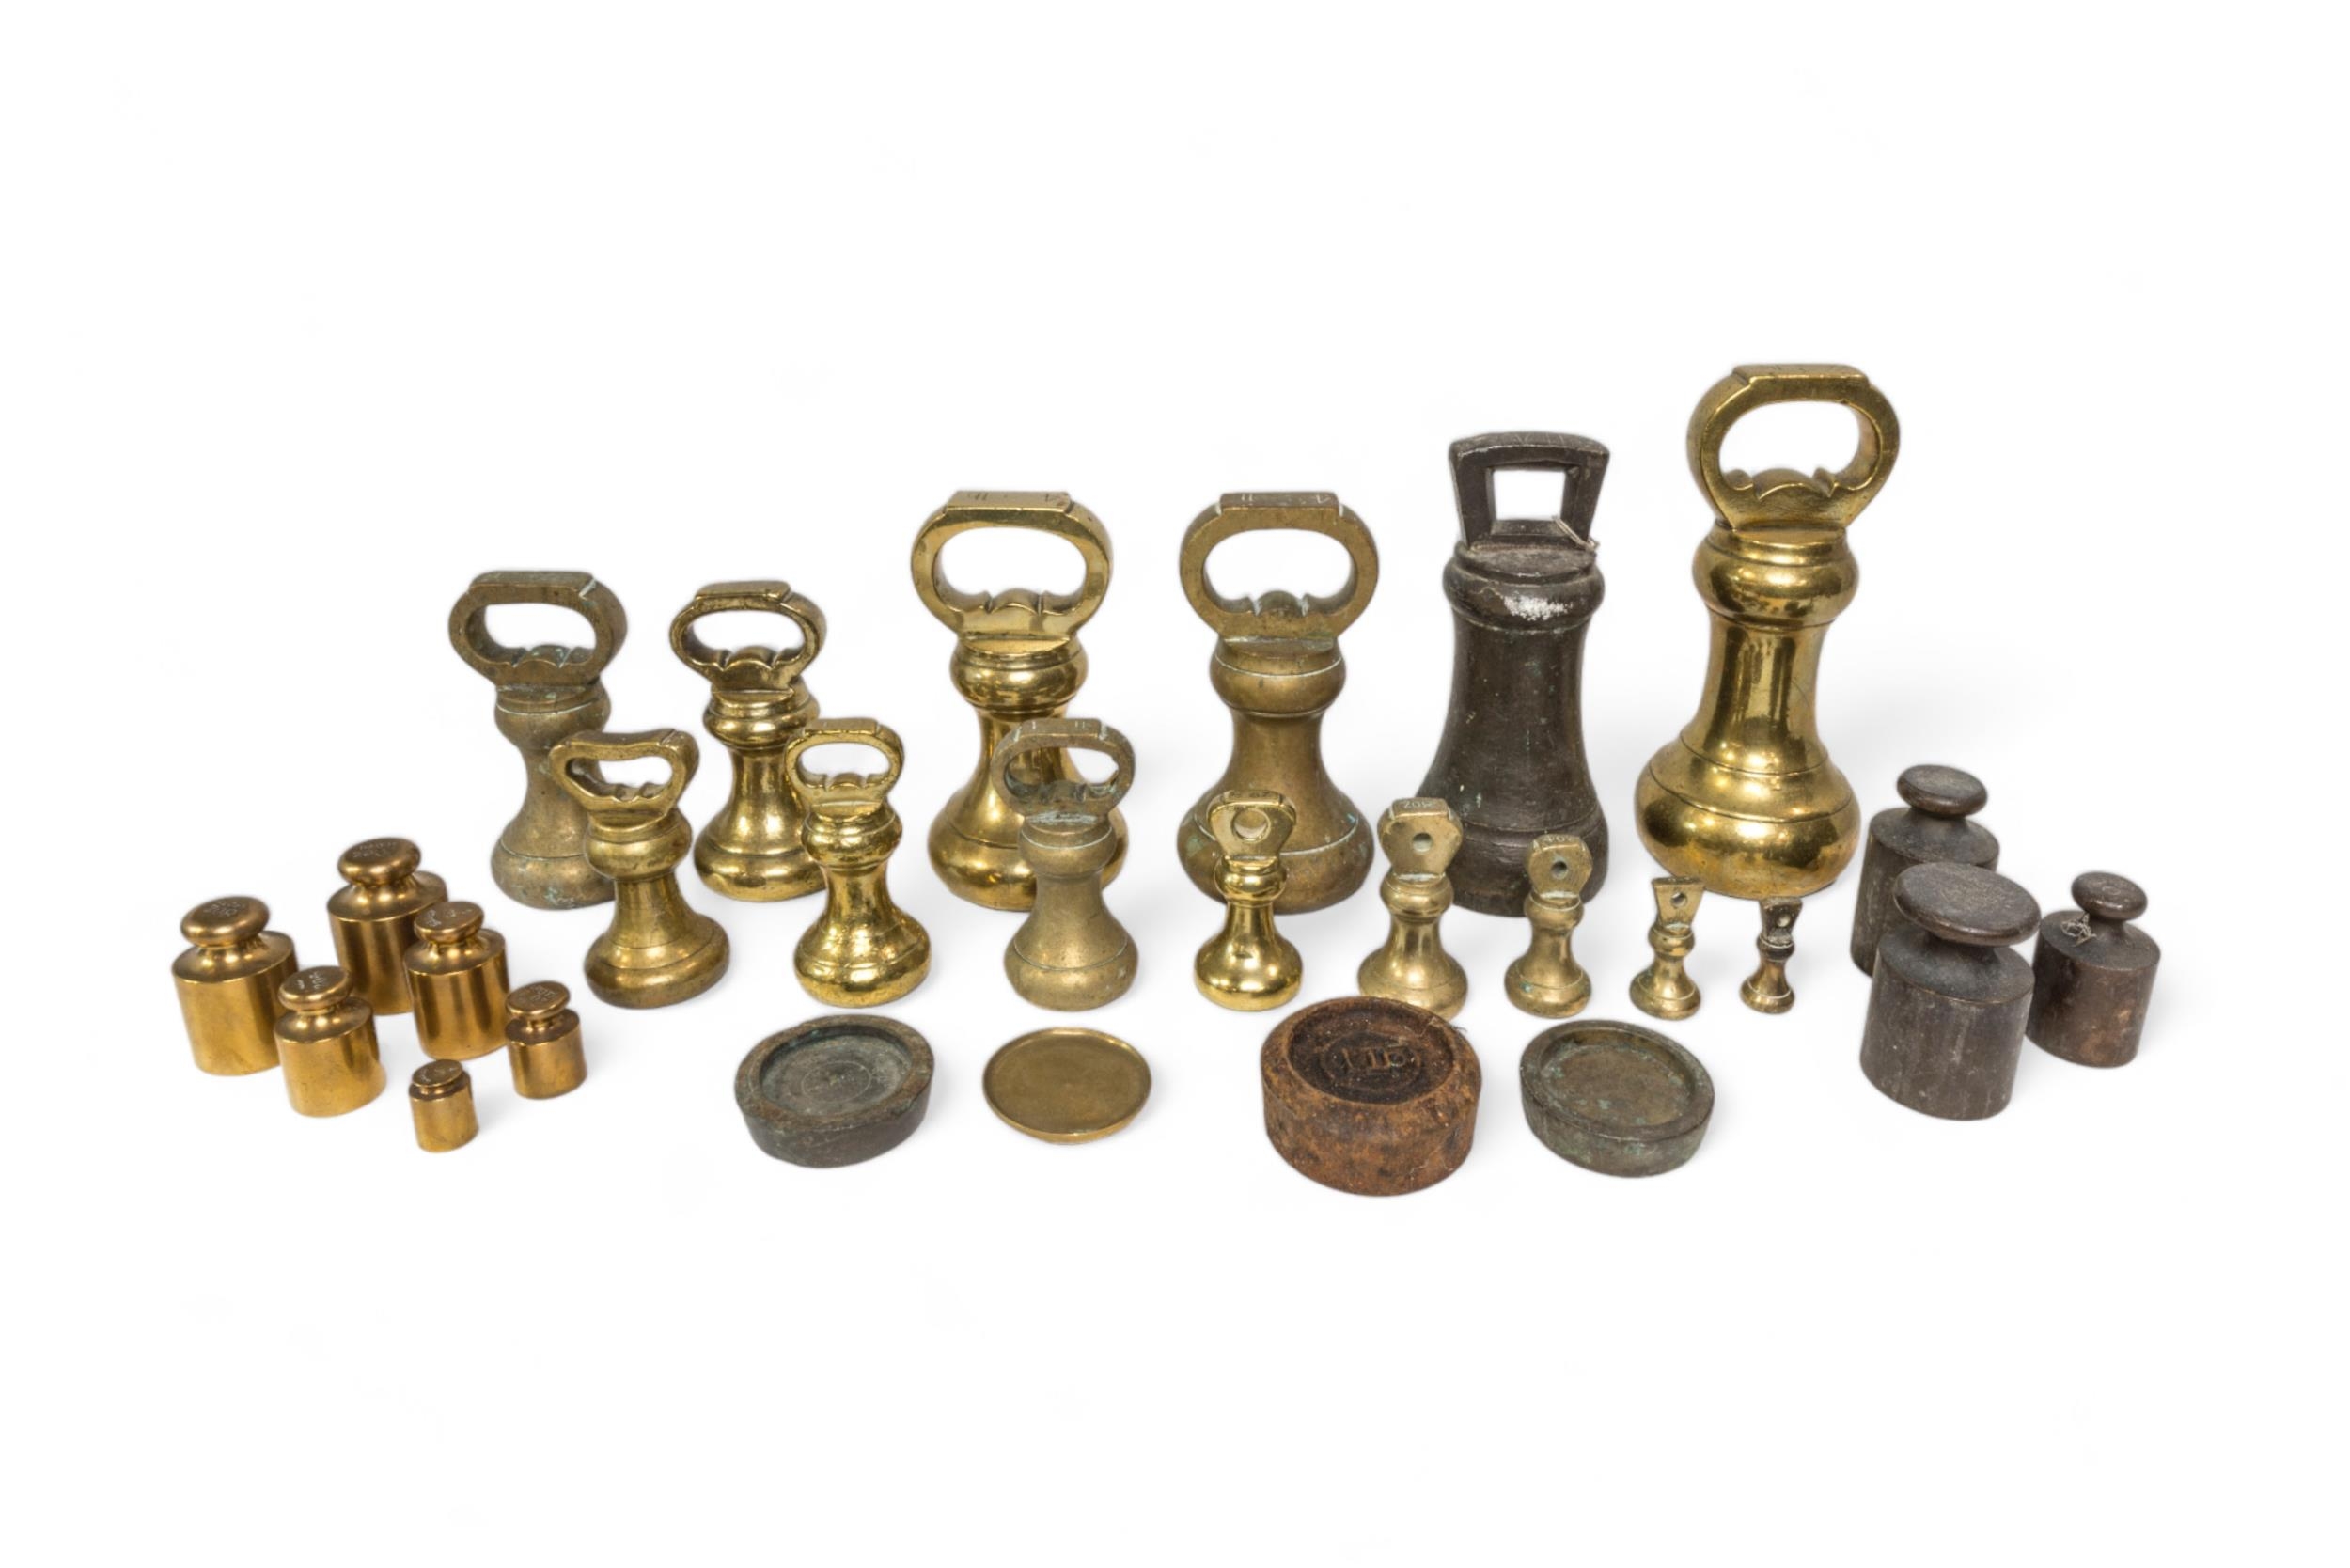 A 7LB BRASS BELL WEIGHT, other assorted bell weights of various dates and other weights. A lot